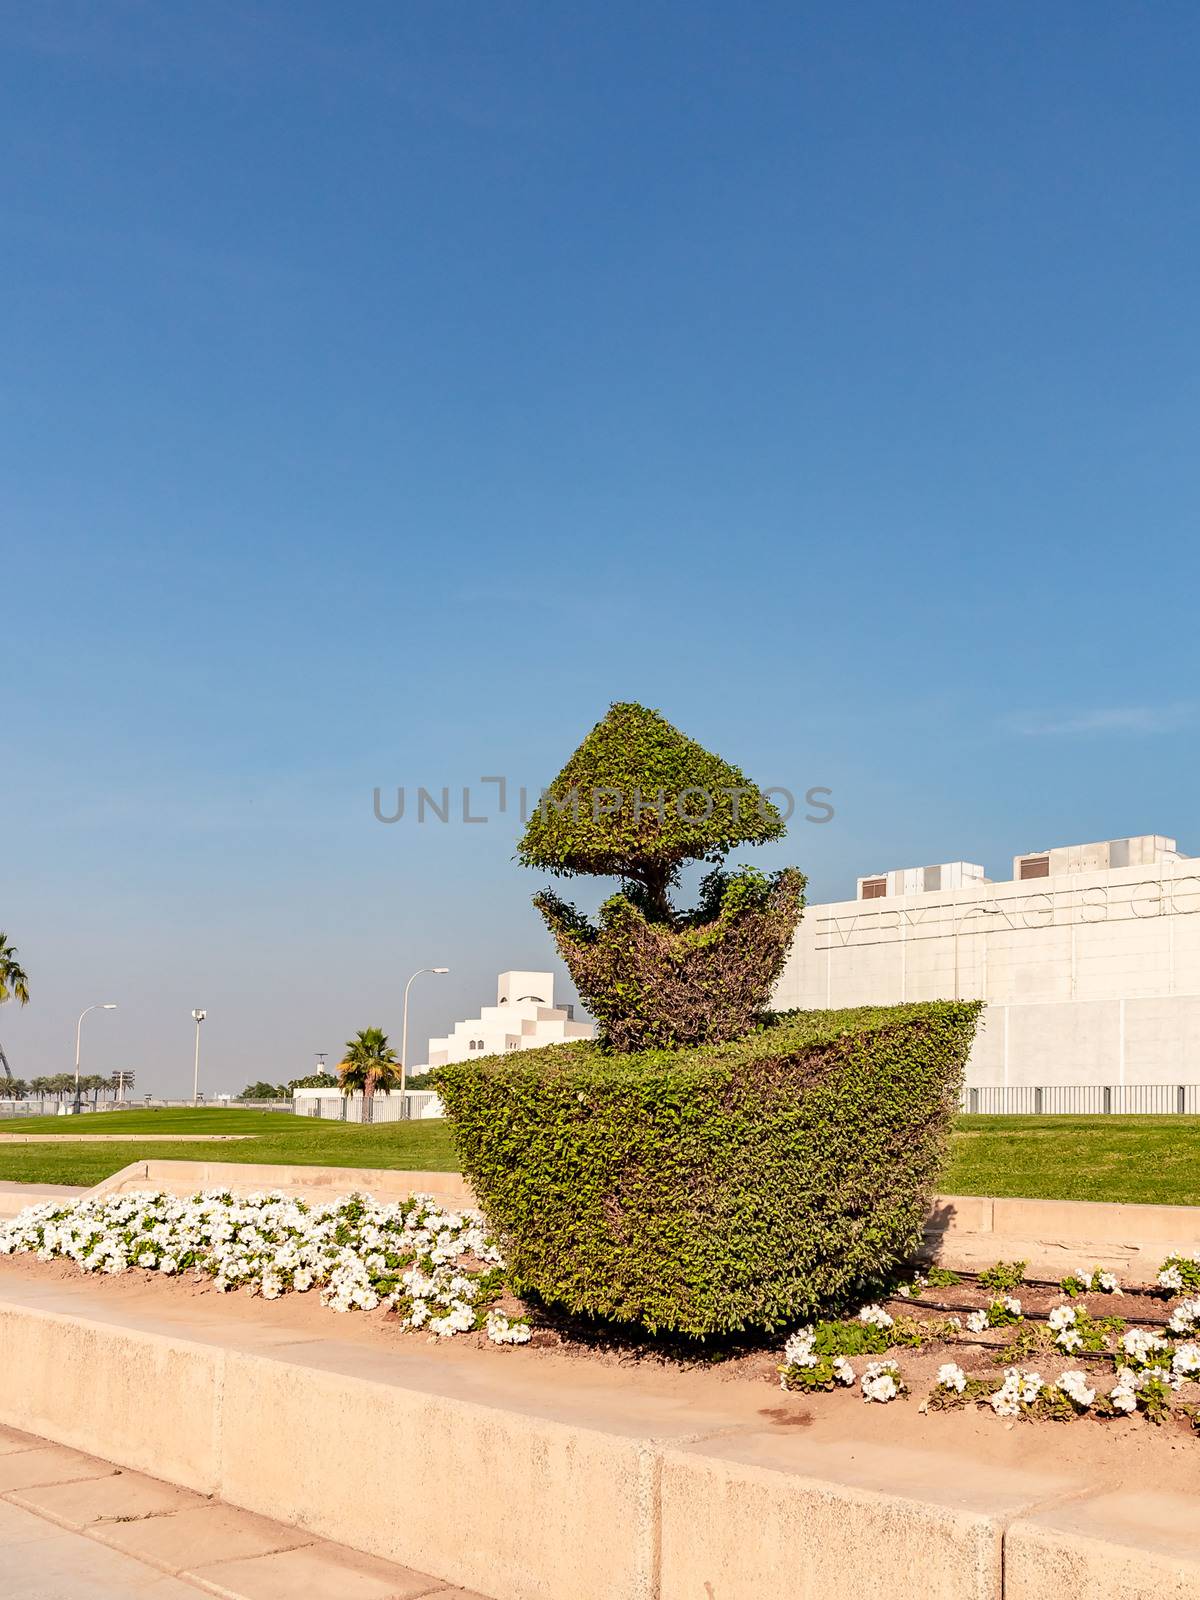 Shaped trimmed bush in the Doha, the capital of Qatar by galsand